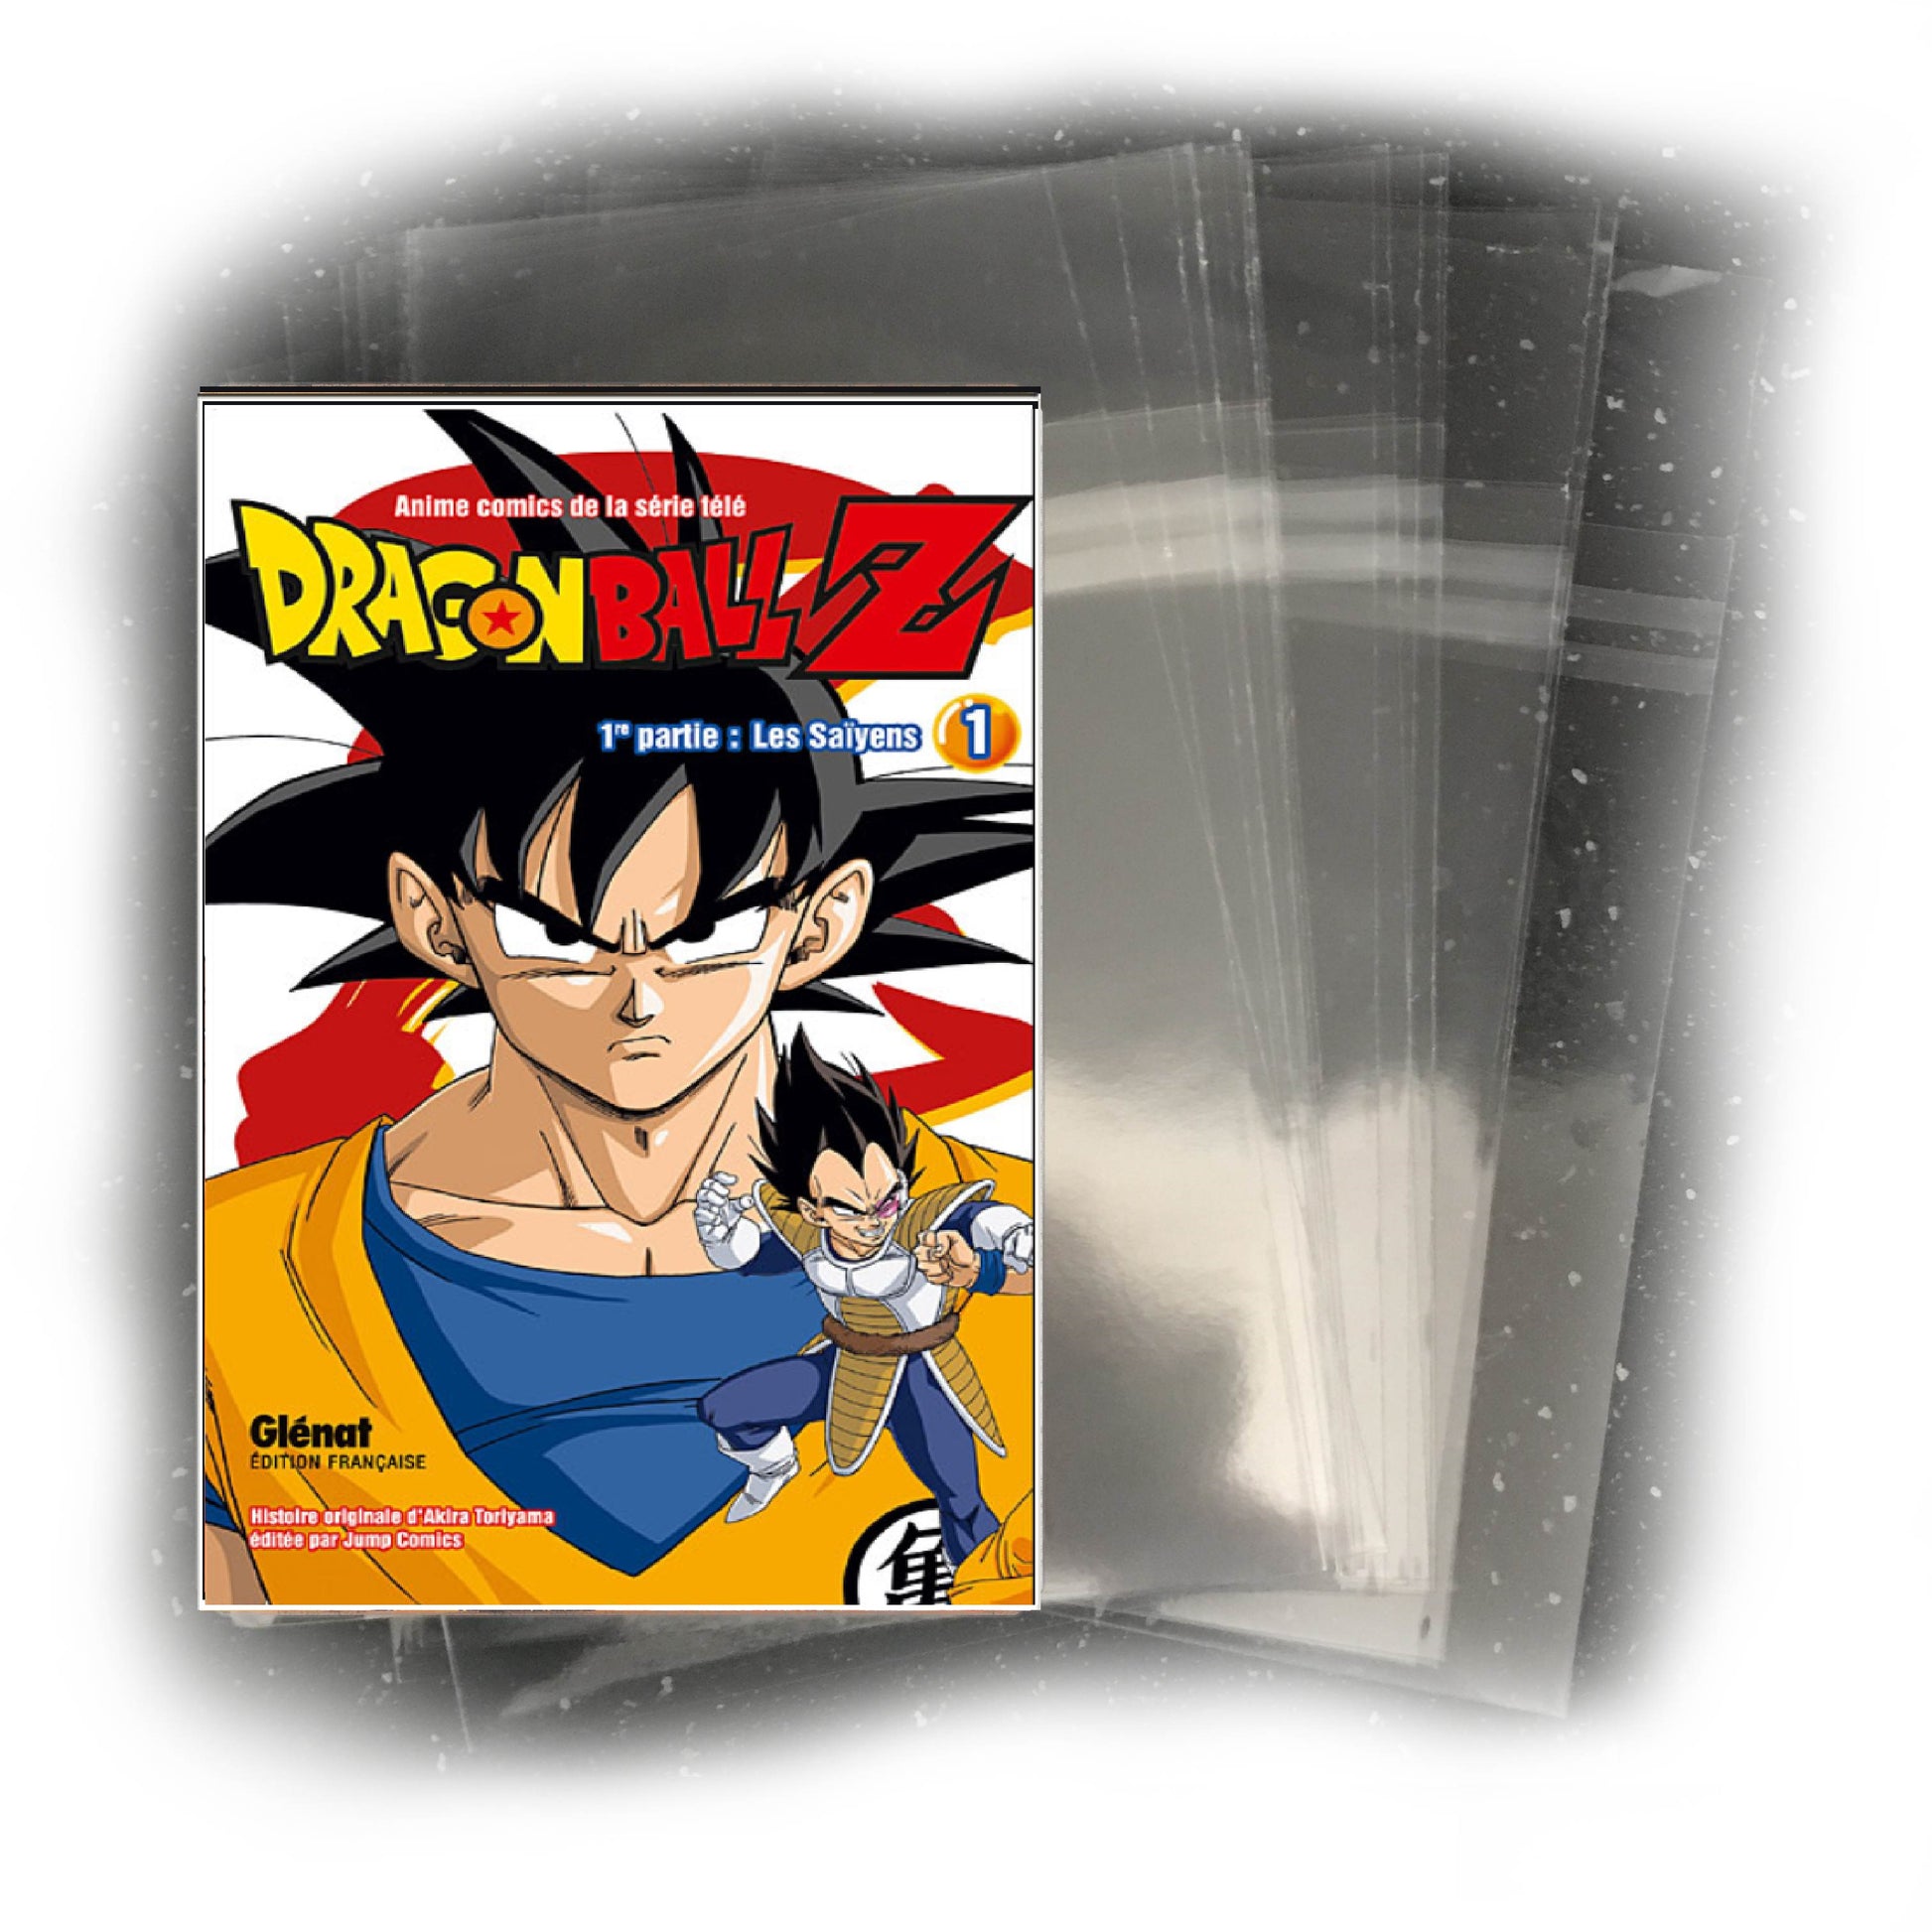 100 buste per MANGAS 140x190 mm – My-smartup